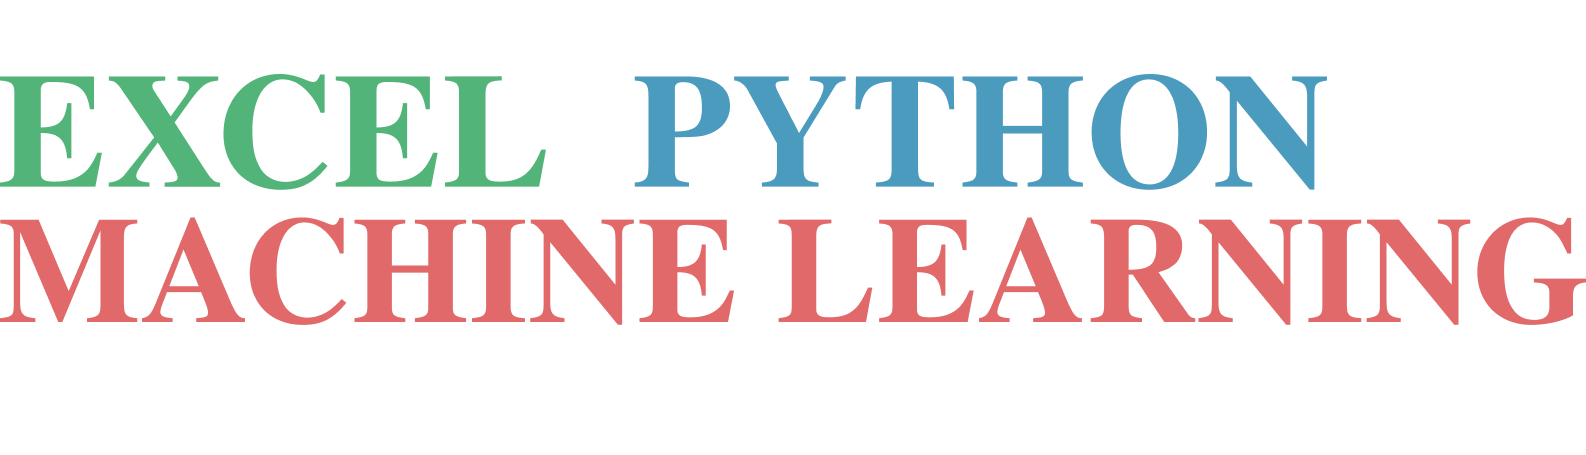 The Complete Excel, Python and Machine Learning Mega Bundle